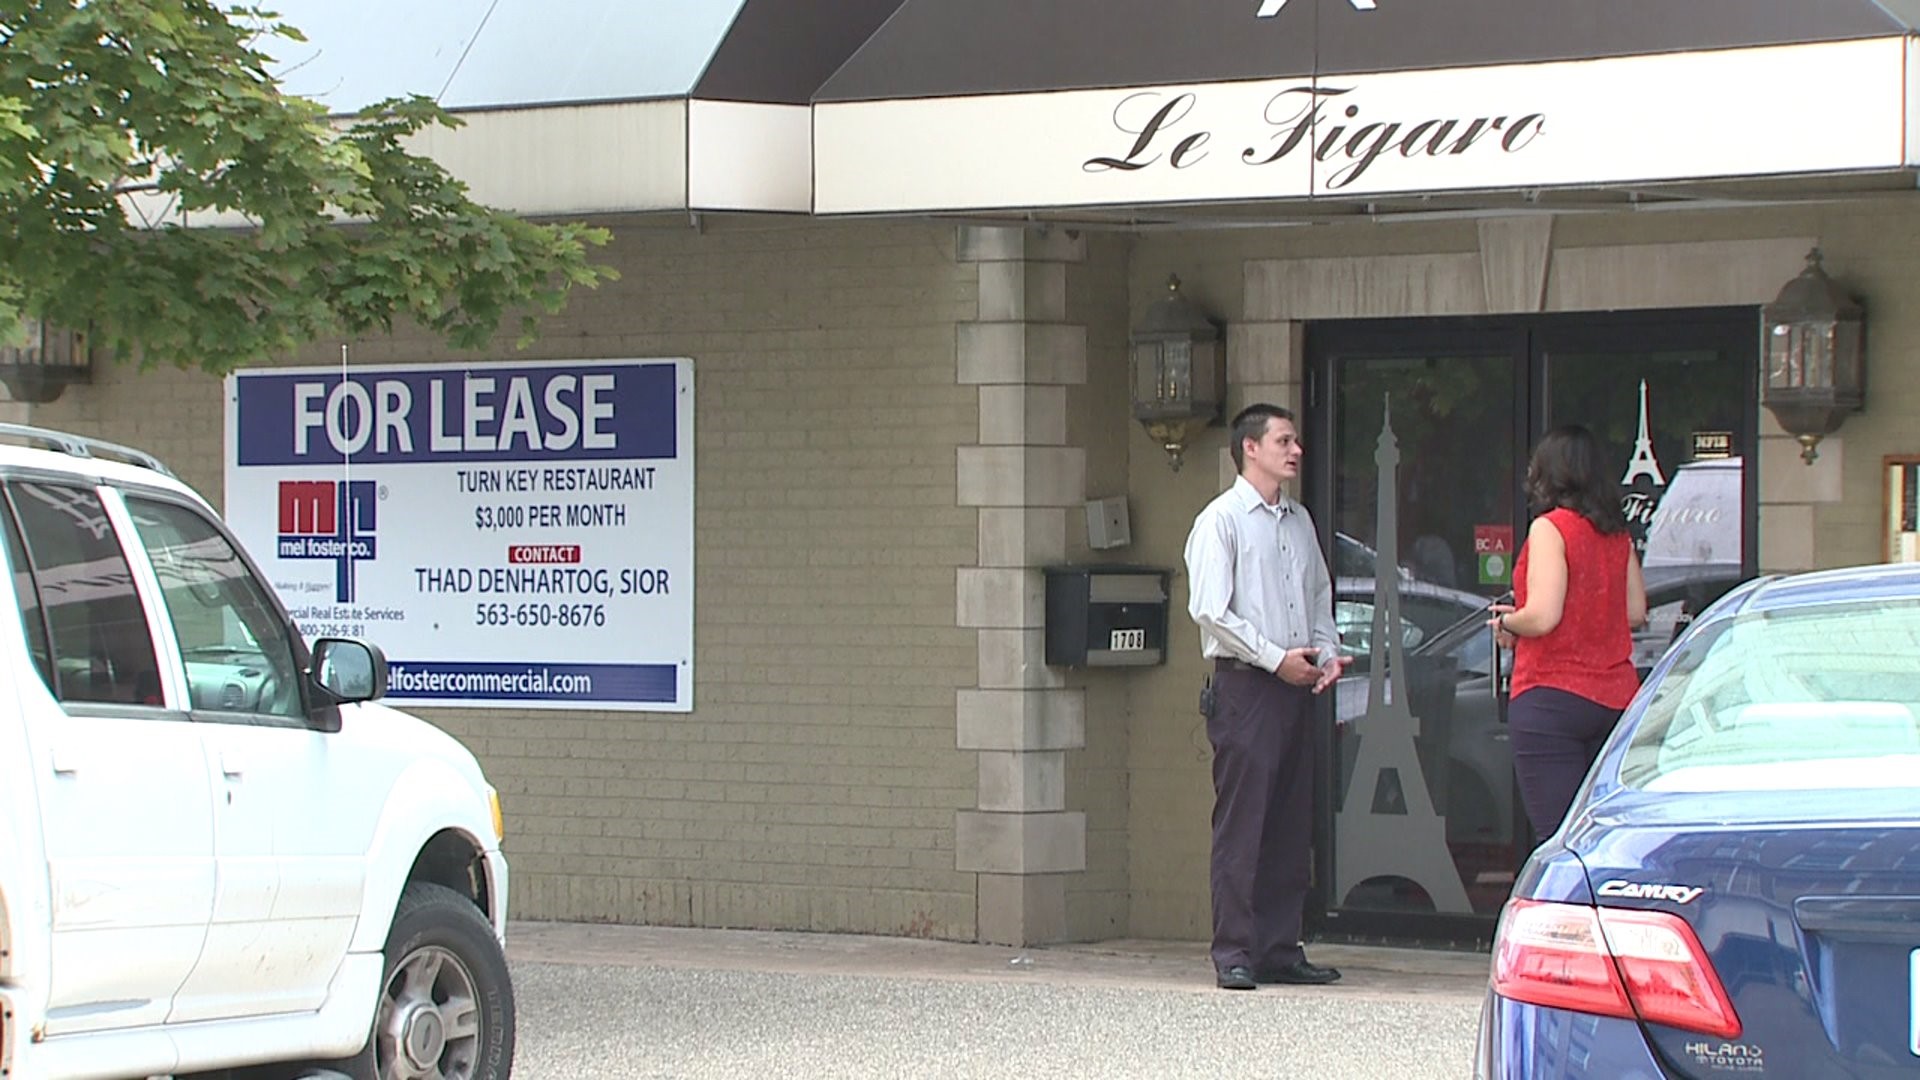 Local man hopes to reopen Le Figaro restaurant